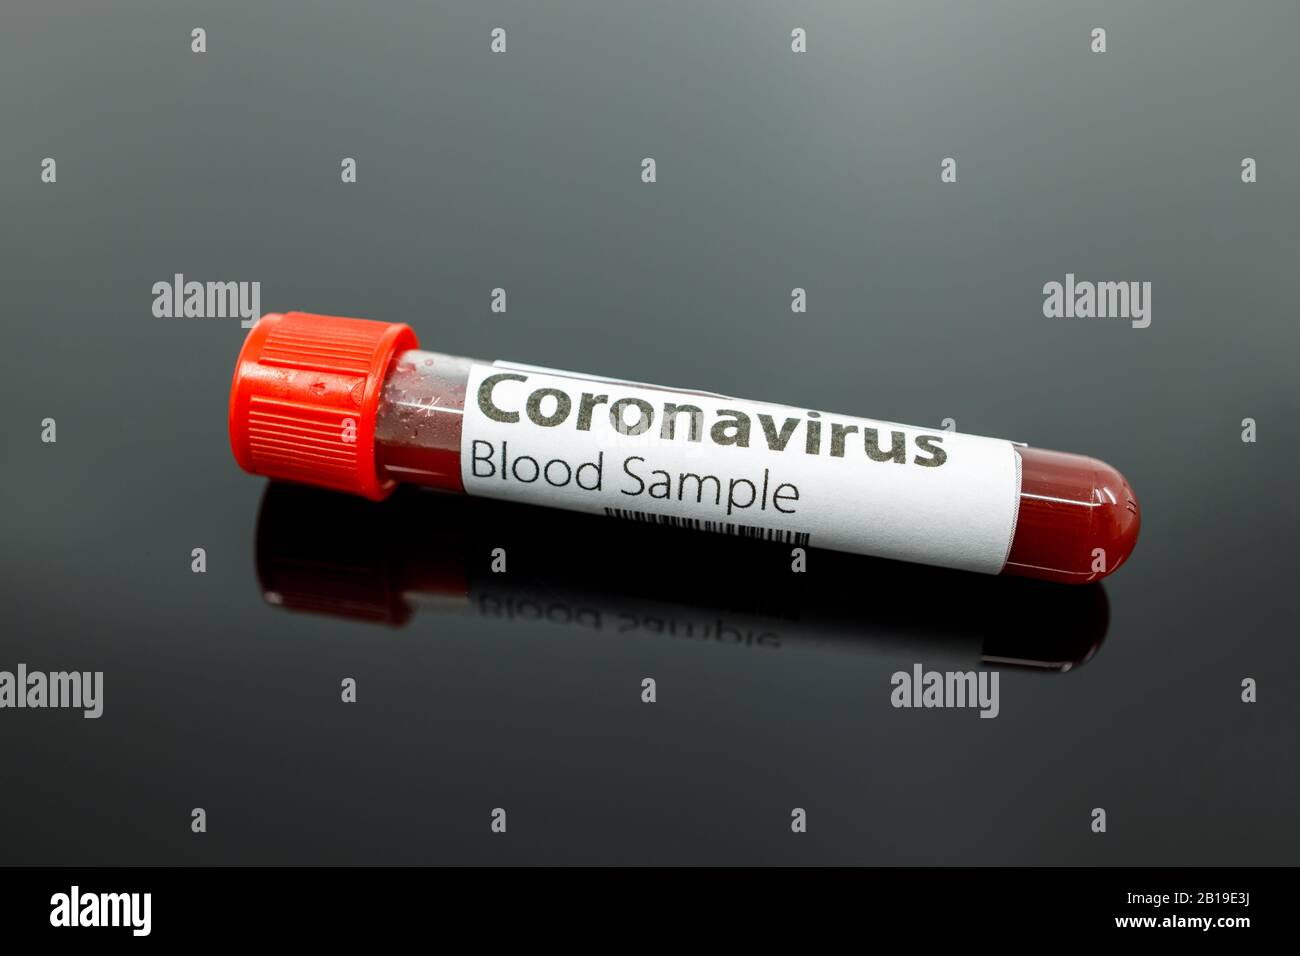 Test tube with blood sample for the new rapidly spreading Coronavirus that originated in Wuhan, China. Coronavirus blood test tube on black background Stock Photo